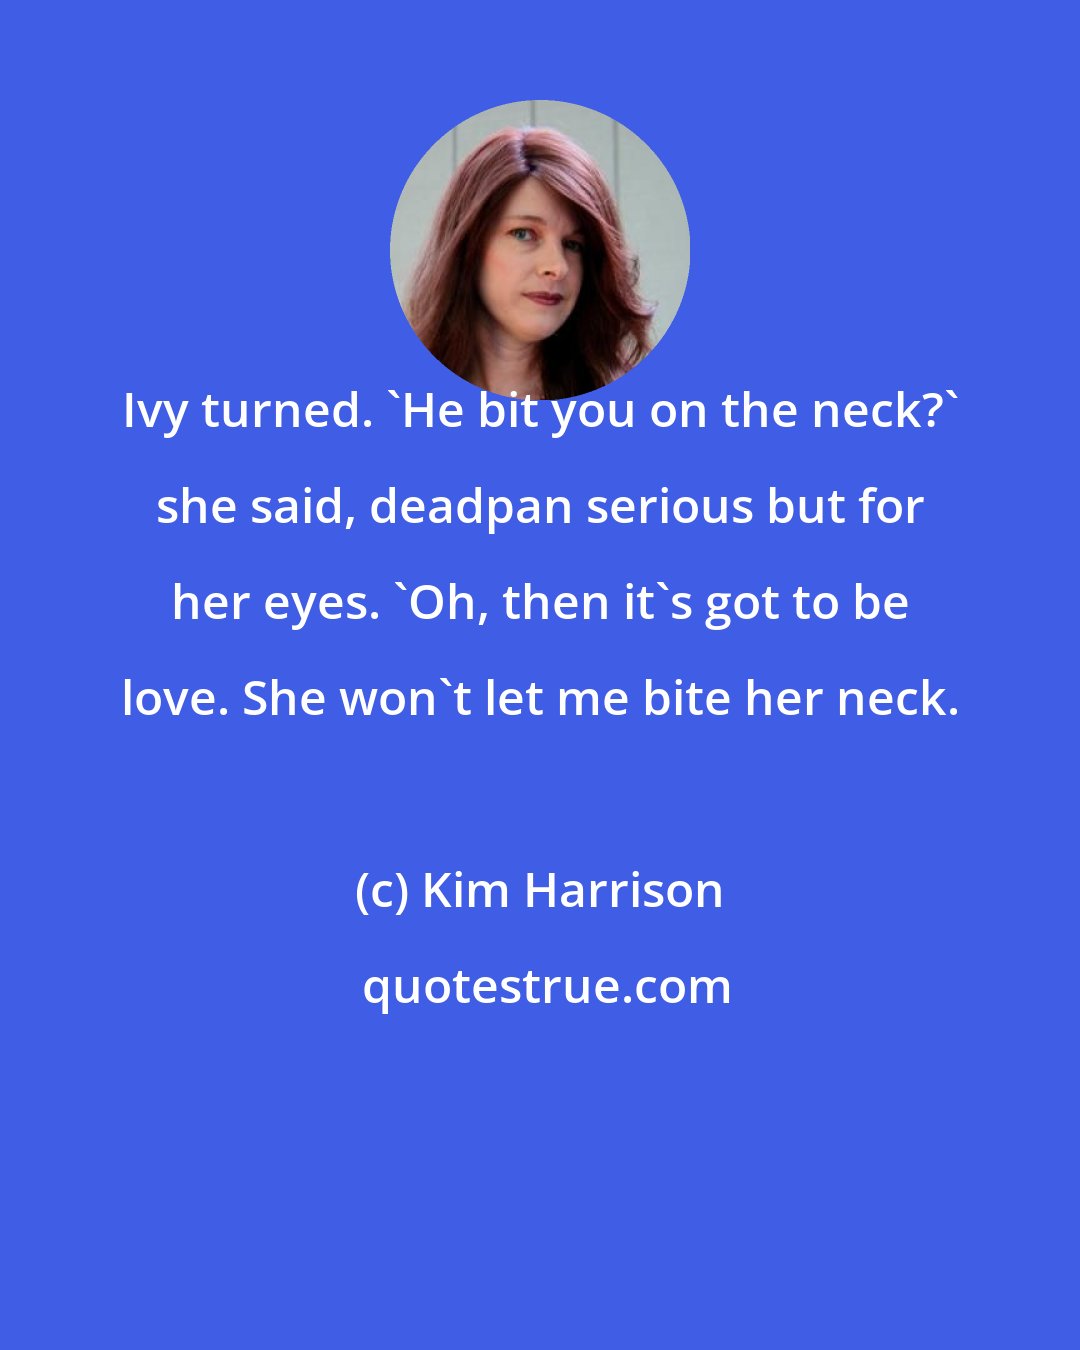 Kim Harrison: Ivy turned. 'He bit you on the neck?' she said, deadpan serious but for her eyes. 'Oh, then it's got to be love. She won't let me bite her neck.